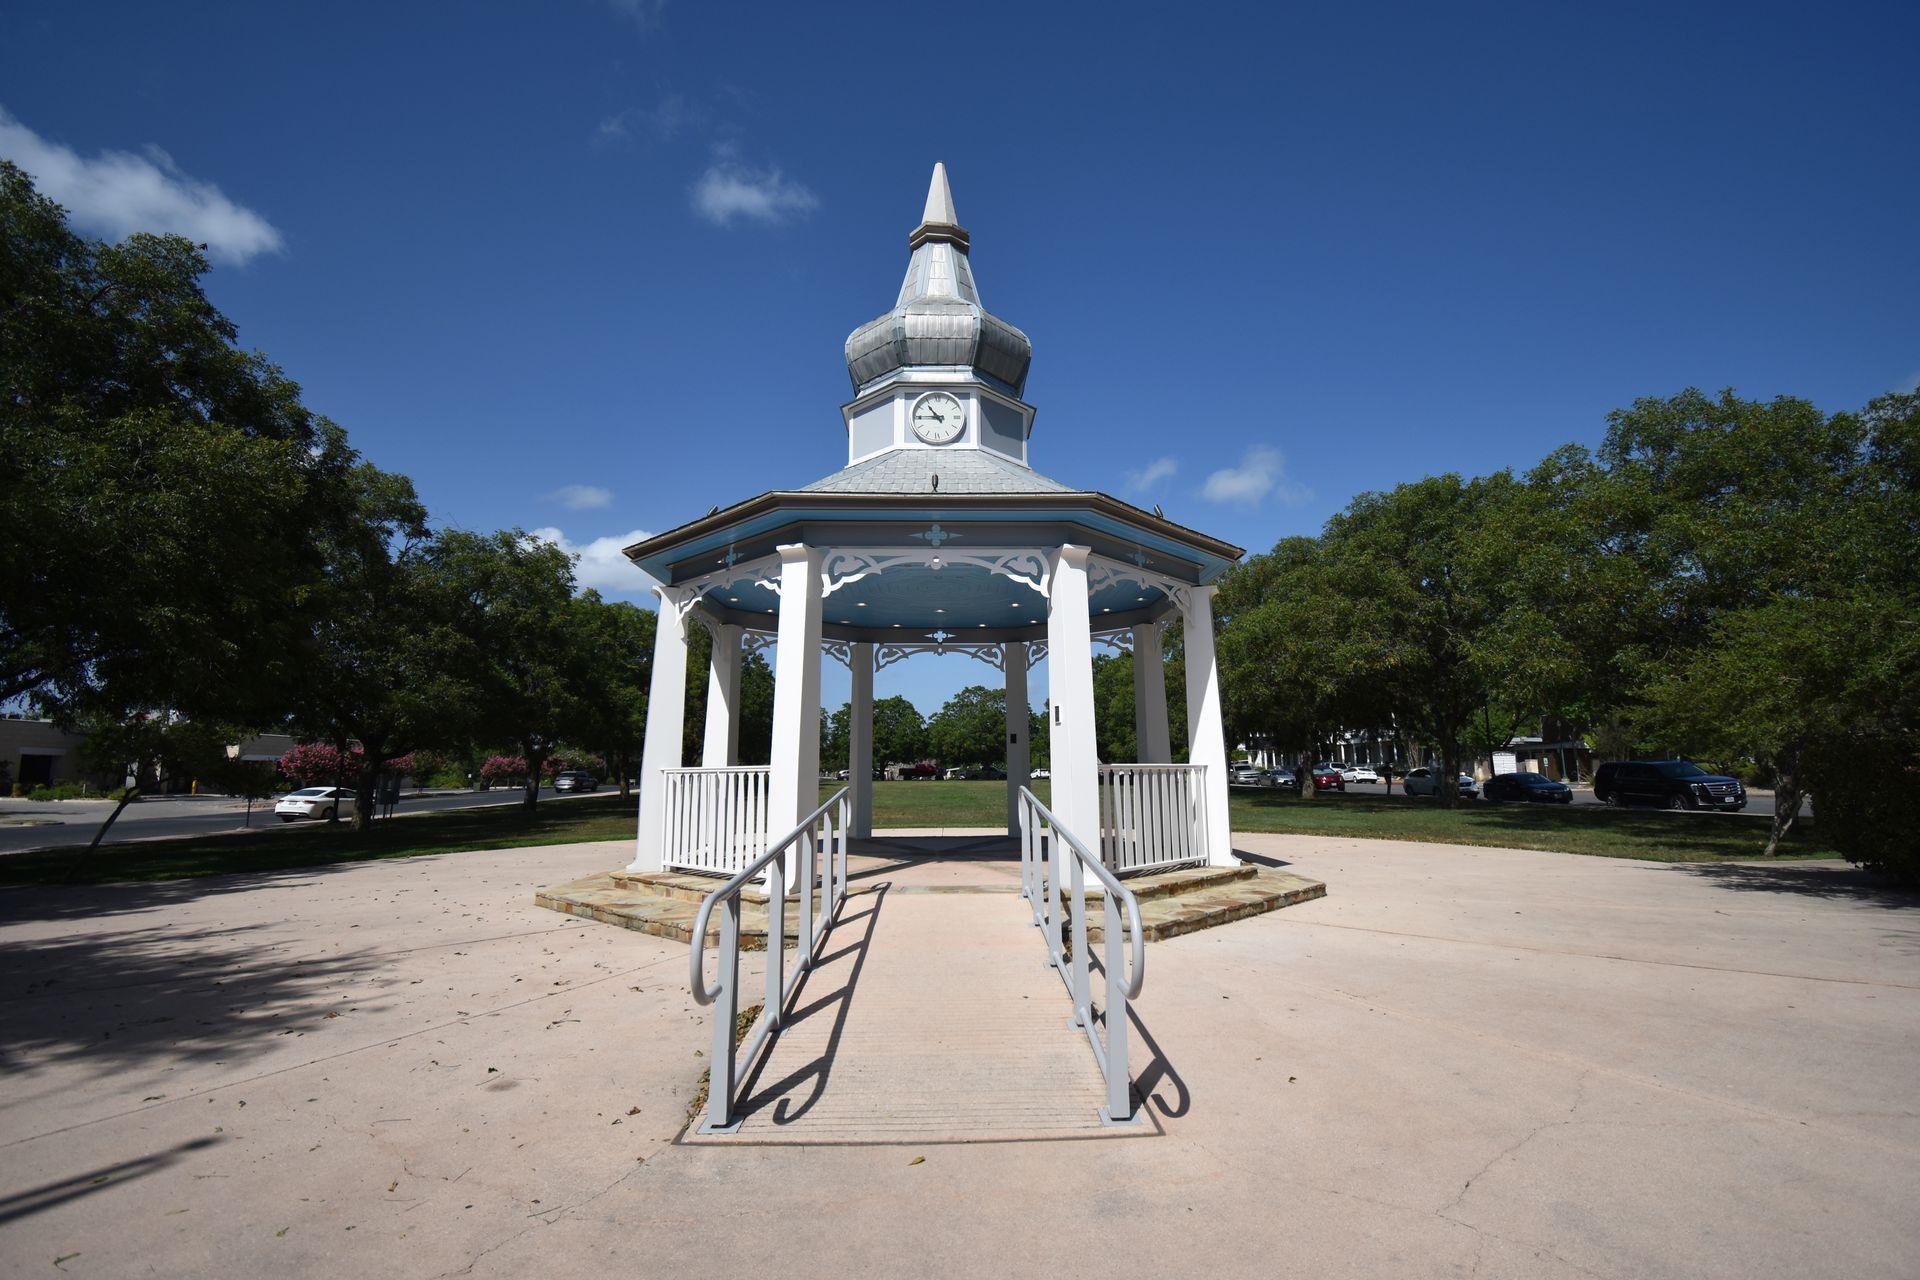 A small white gazebo in Main Plaza Park. The roof of the gazebo is blue.